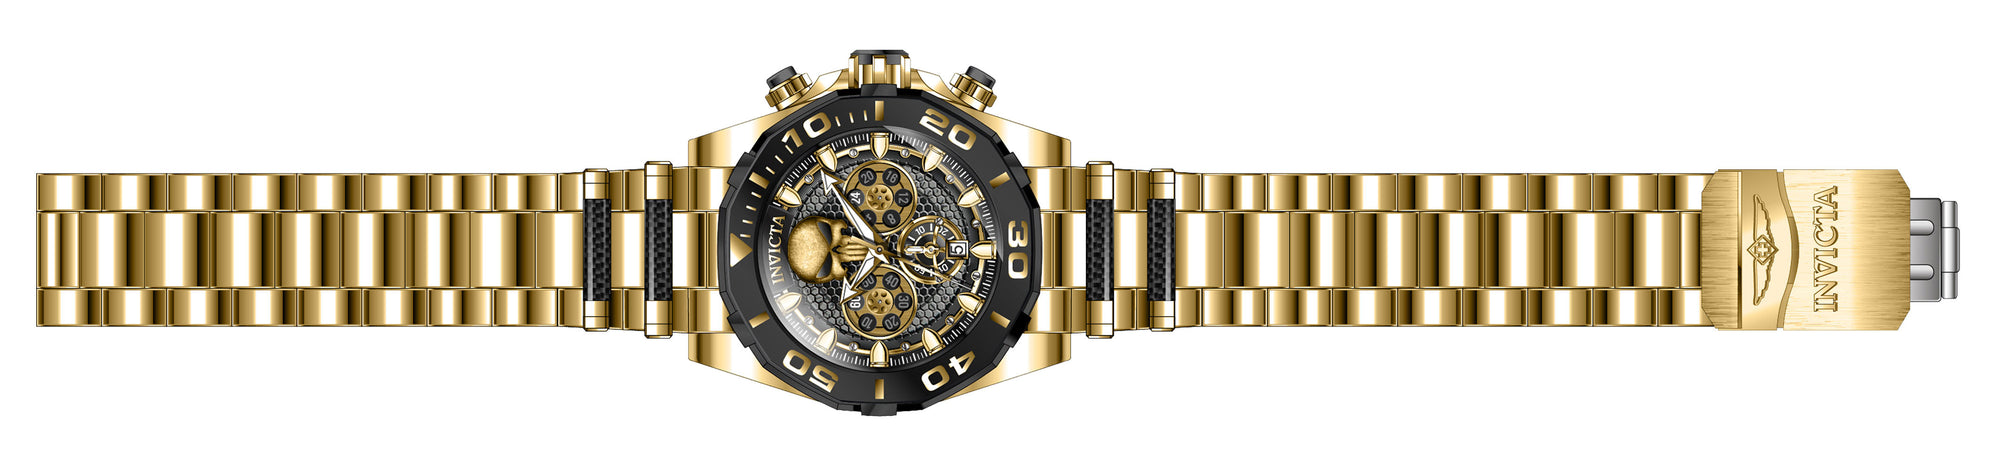 Band For Invicta Marvel 37830